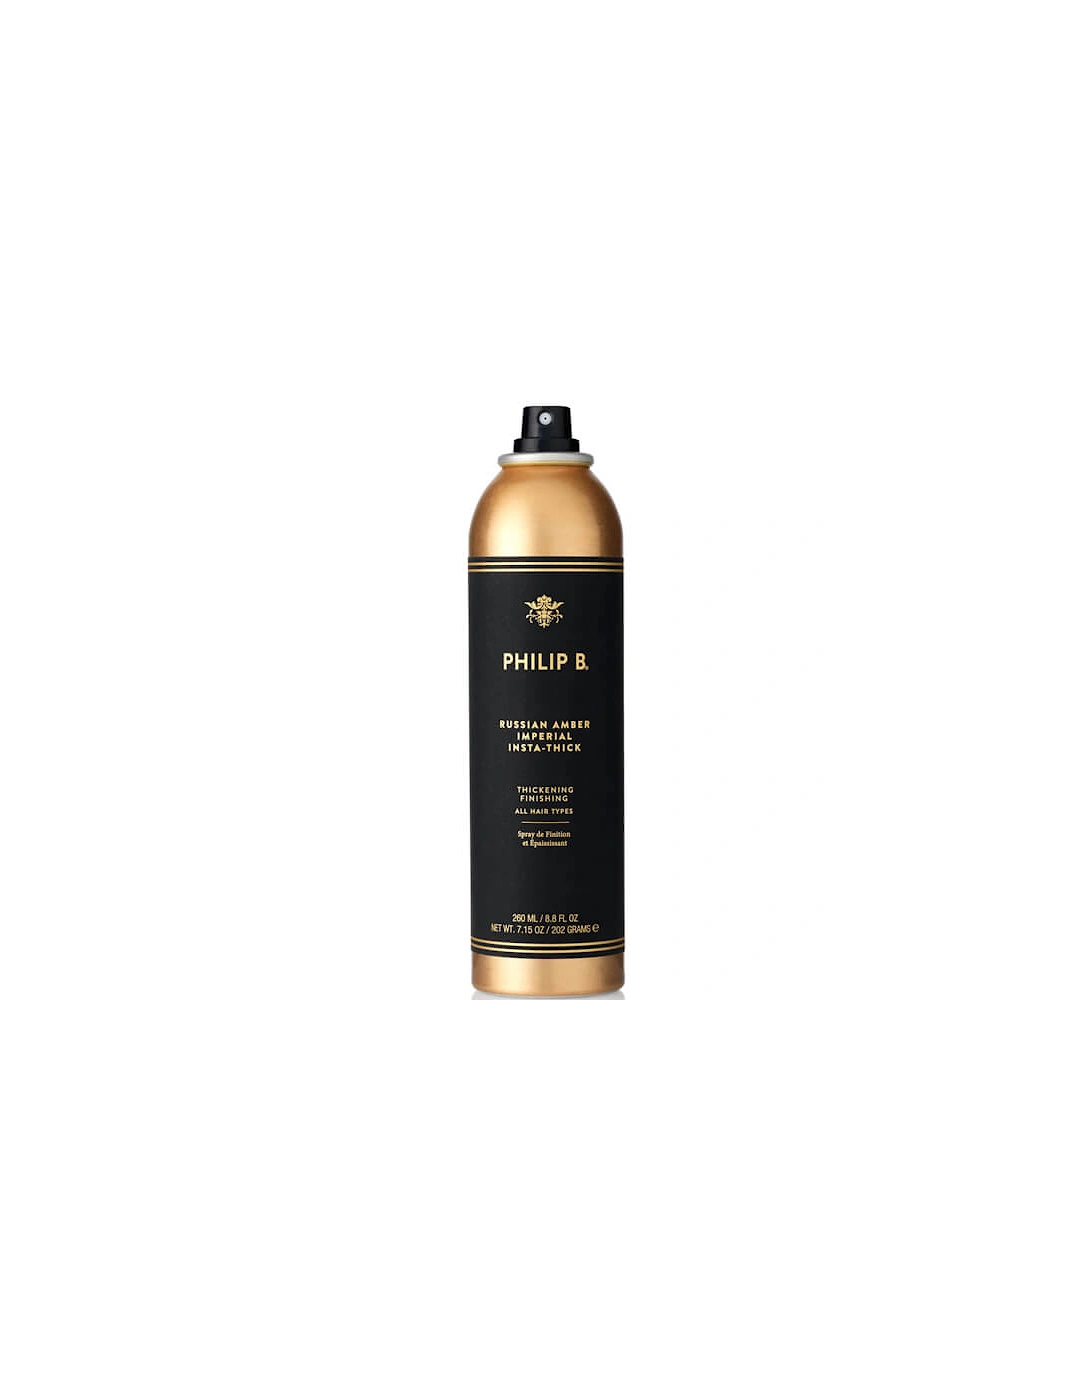 Russian Amber Imperial Insta-Thick Hair Spray (260ml) - Philip B, 2 of 1